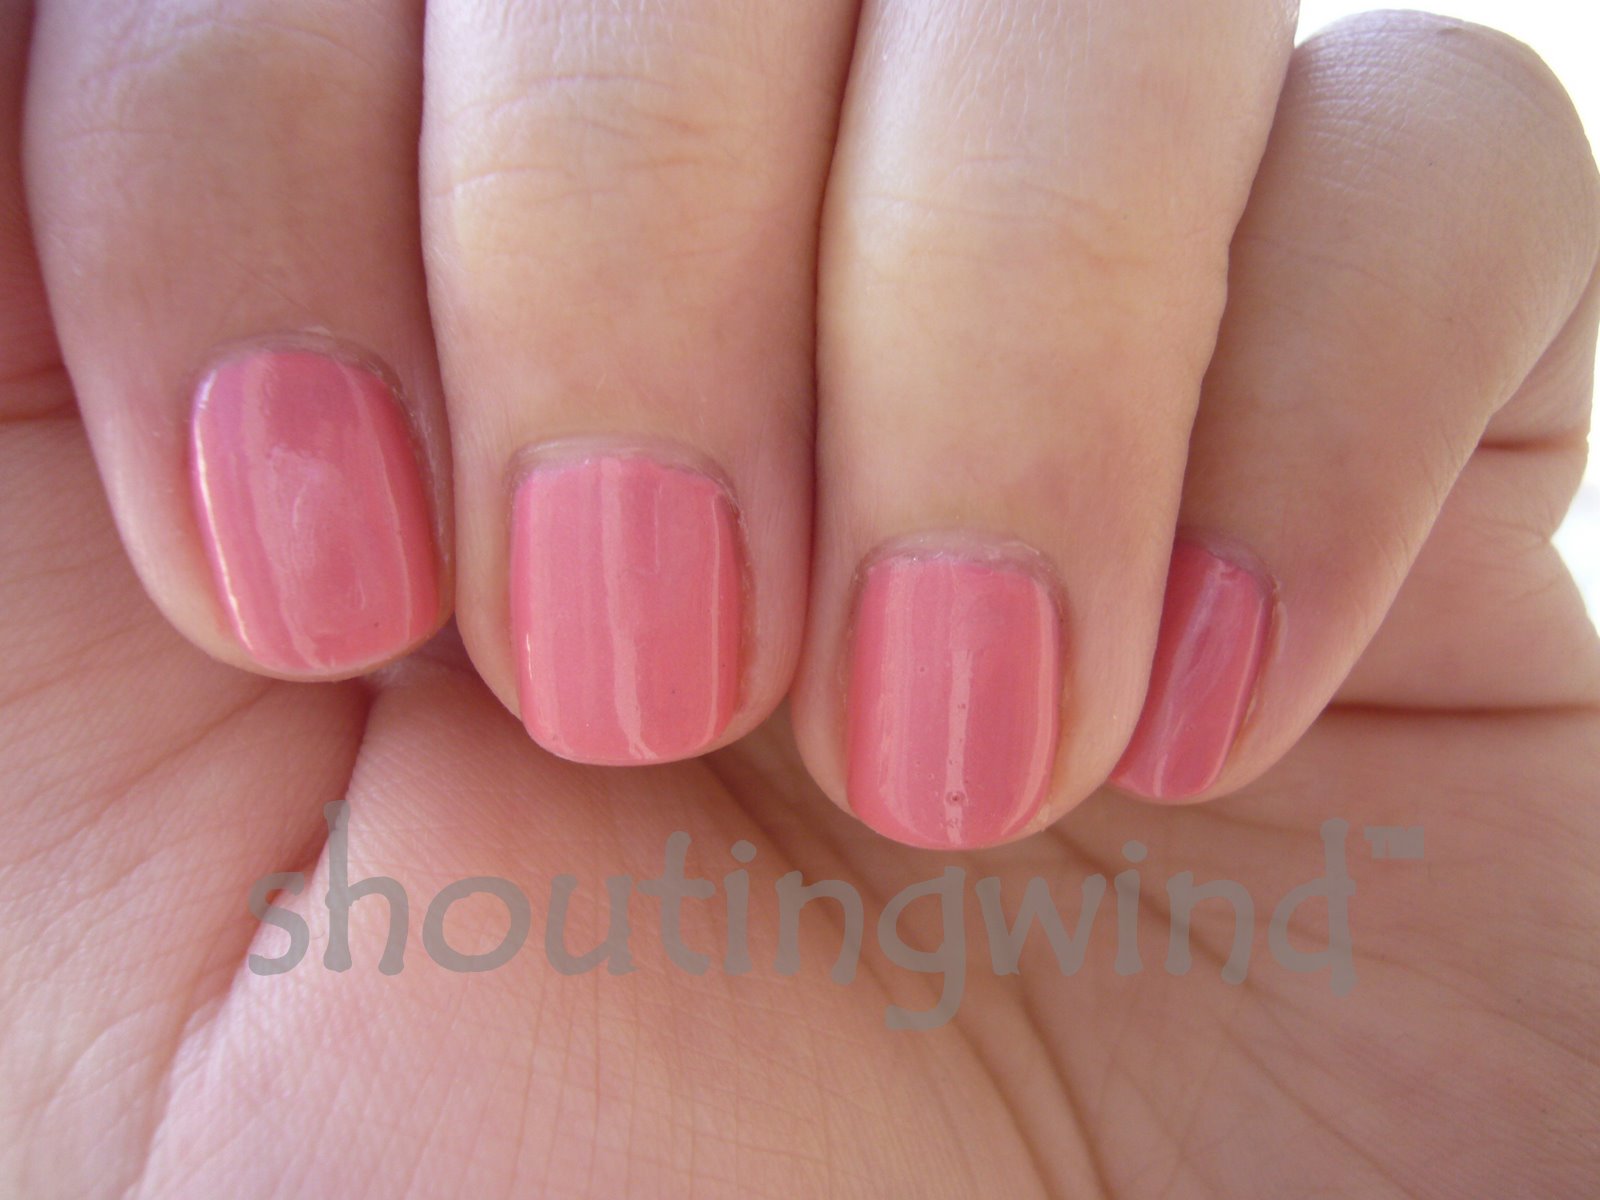 To harden soft nails, soak them in warm olive oil for about 20 minutes on